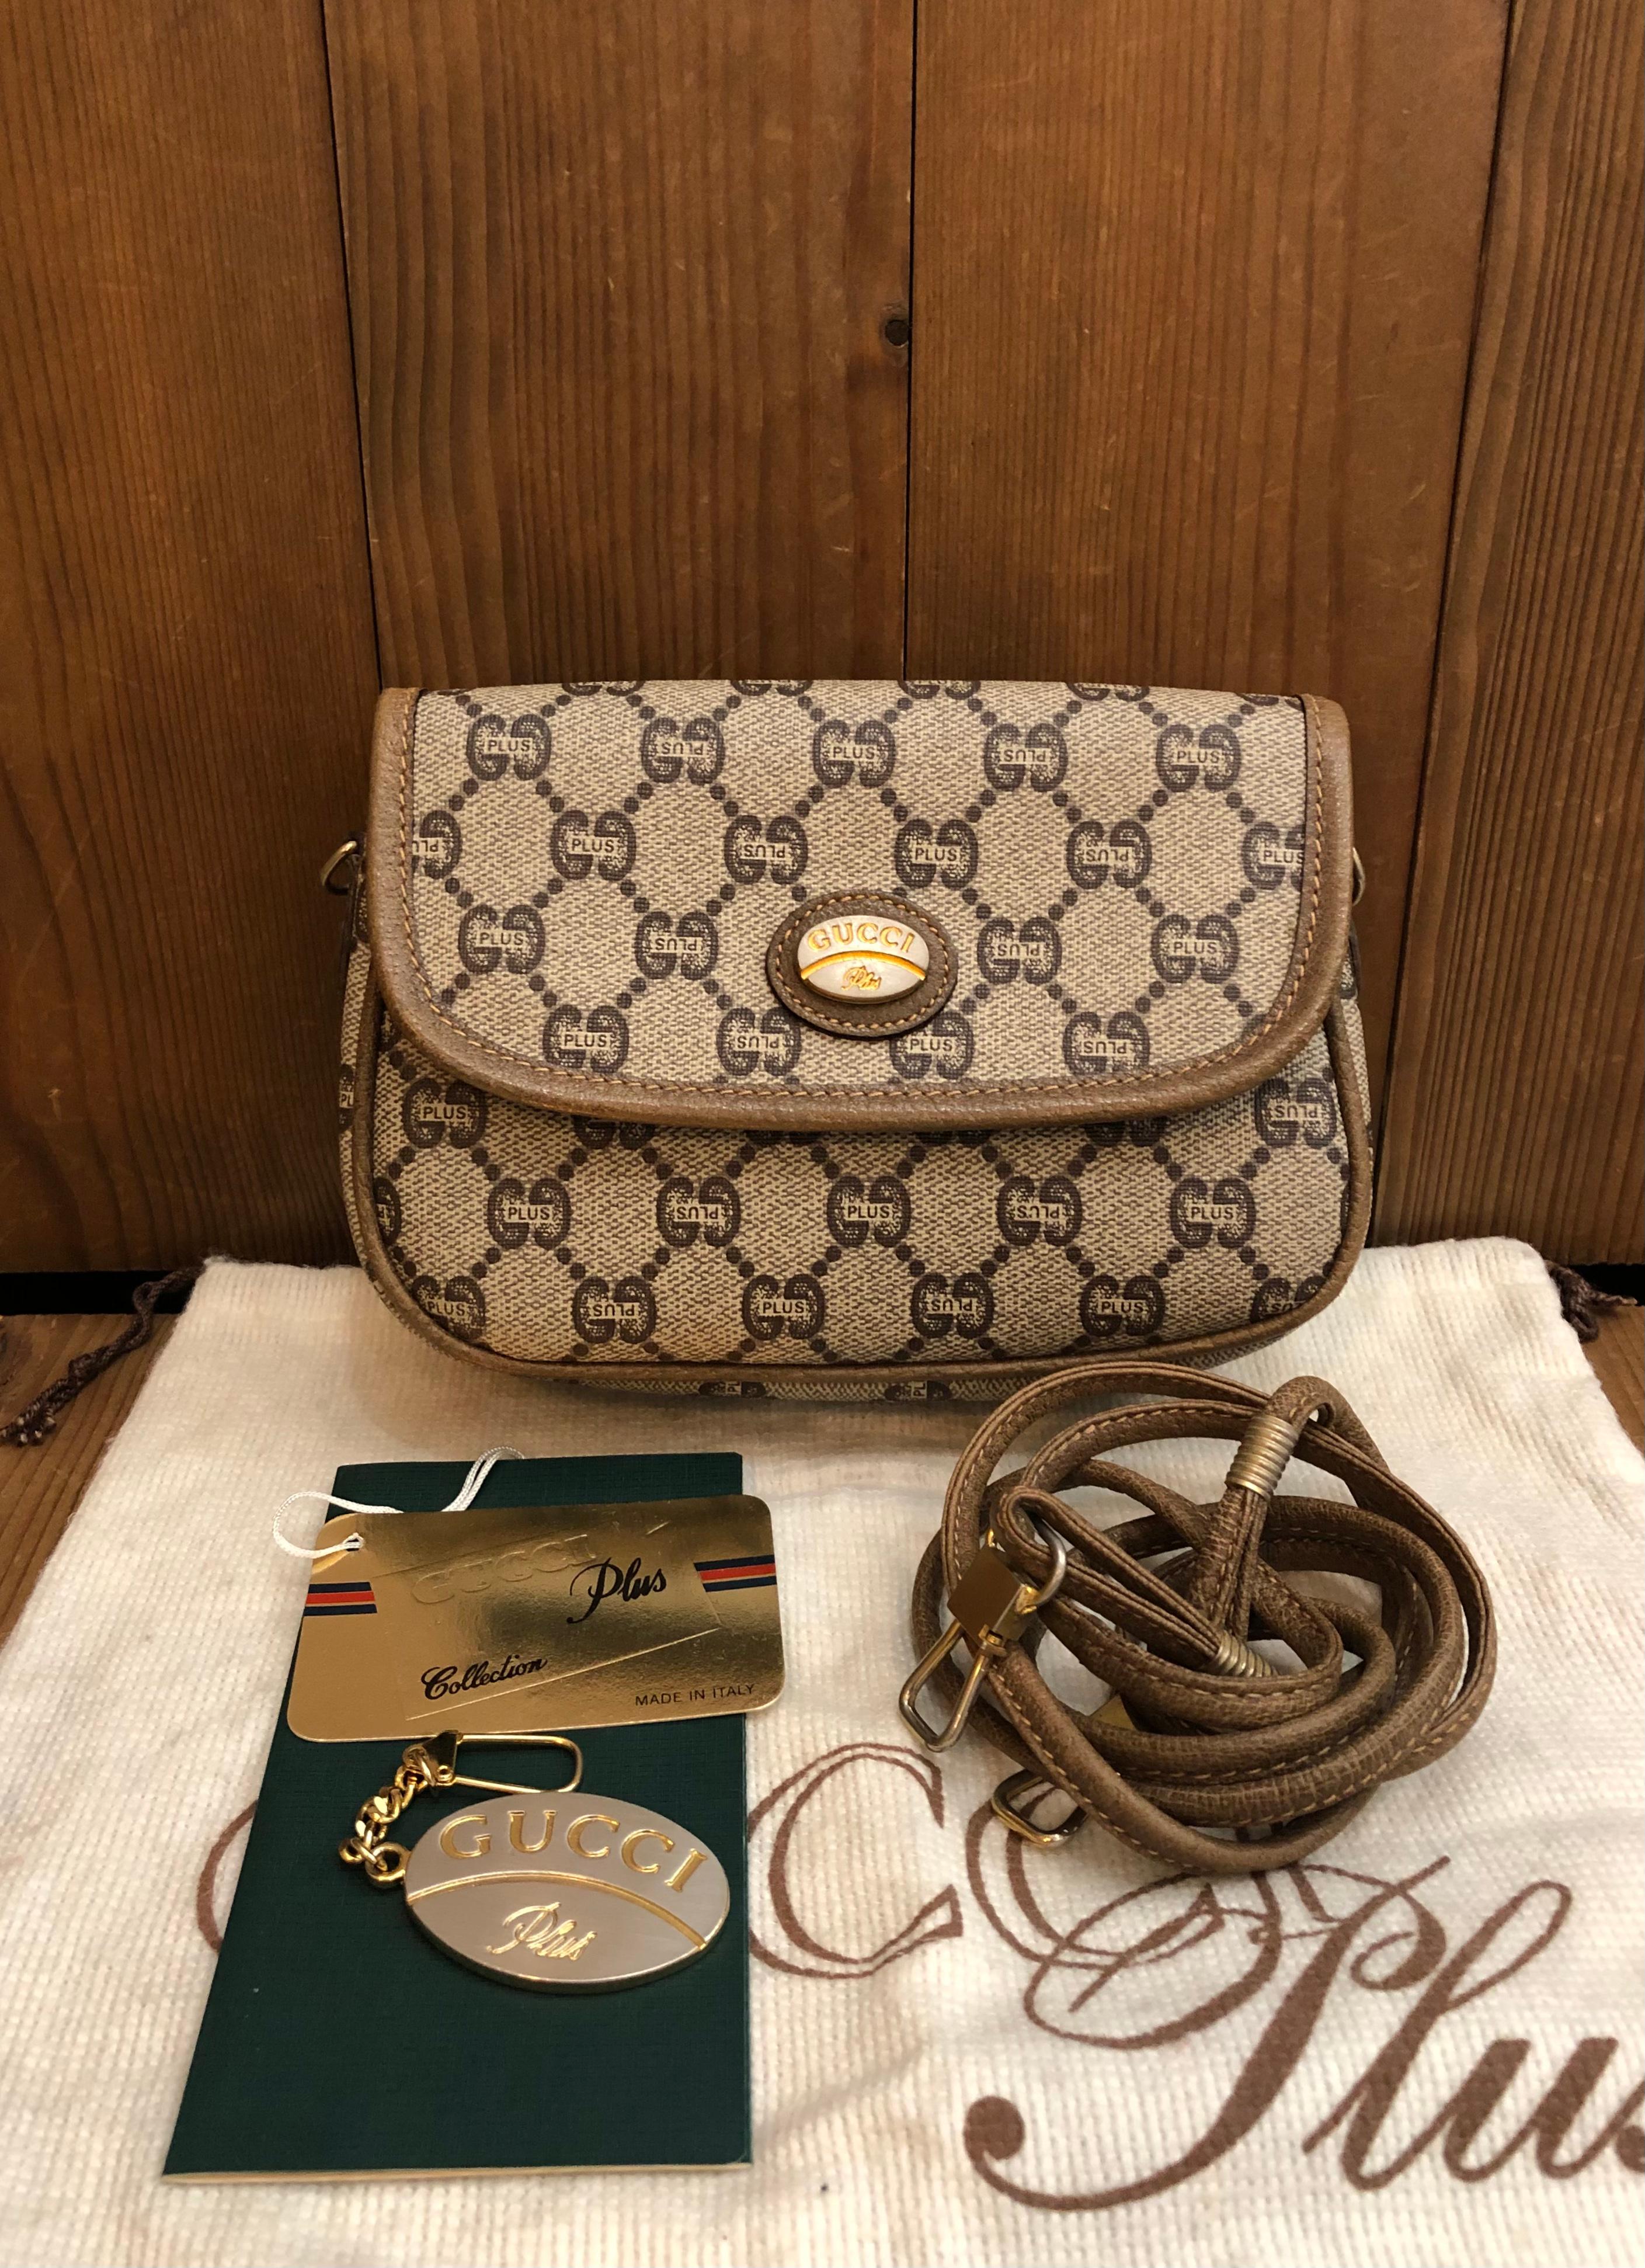 This vinatge GUCCI Plus mini crossbody bag is crafted of GG Plus monogram canvas and pigskin leather in brown. Front flap magnetic snap closure opens to a coated interior which has been professionally cleaned. This vintage Gucci Plus also comes with